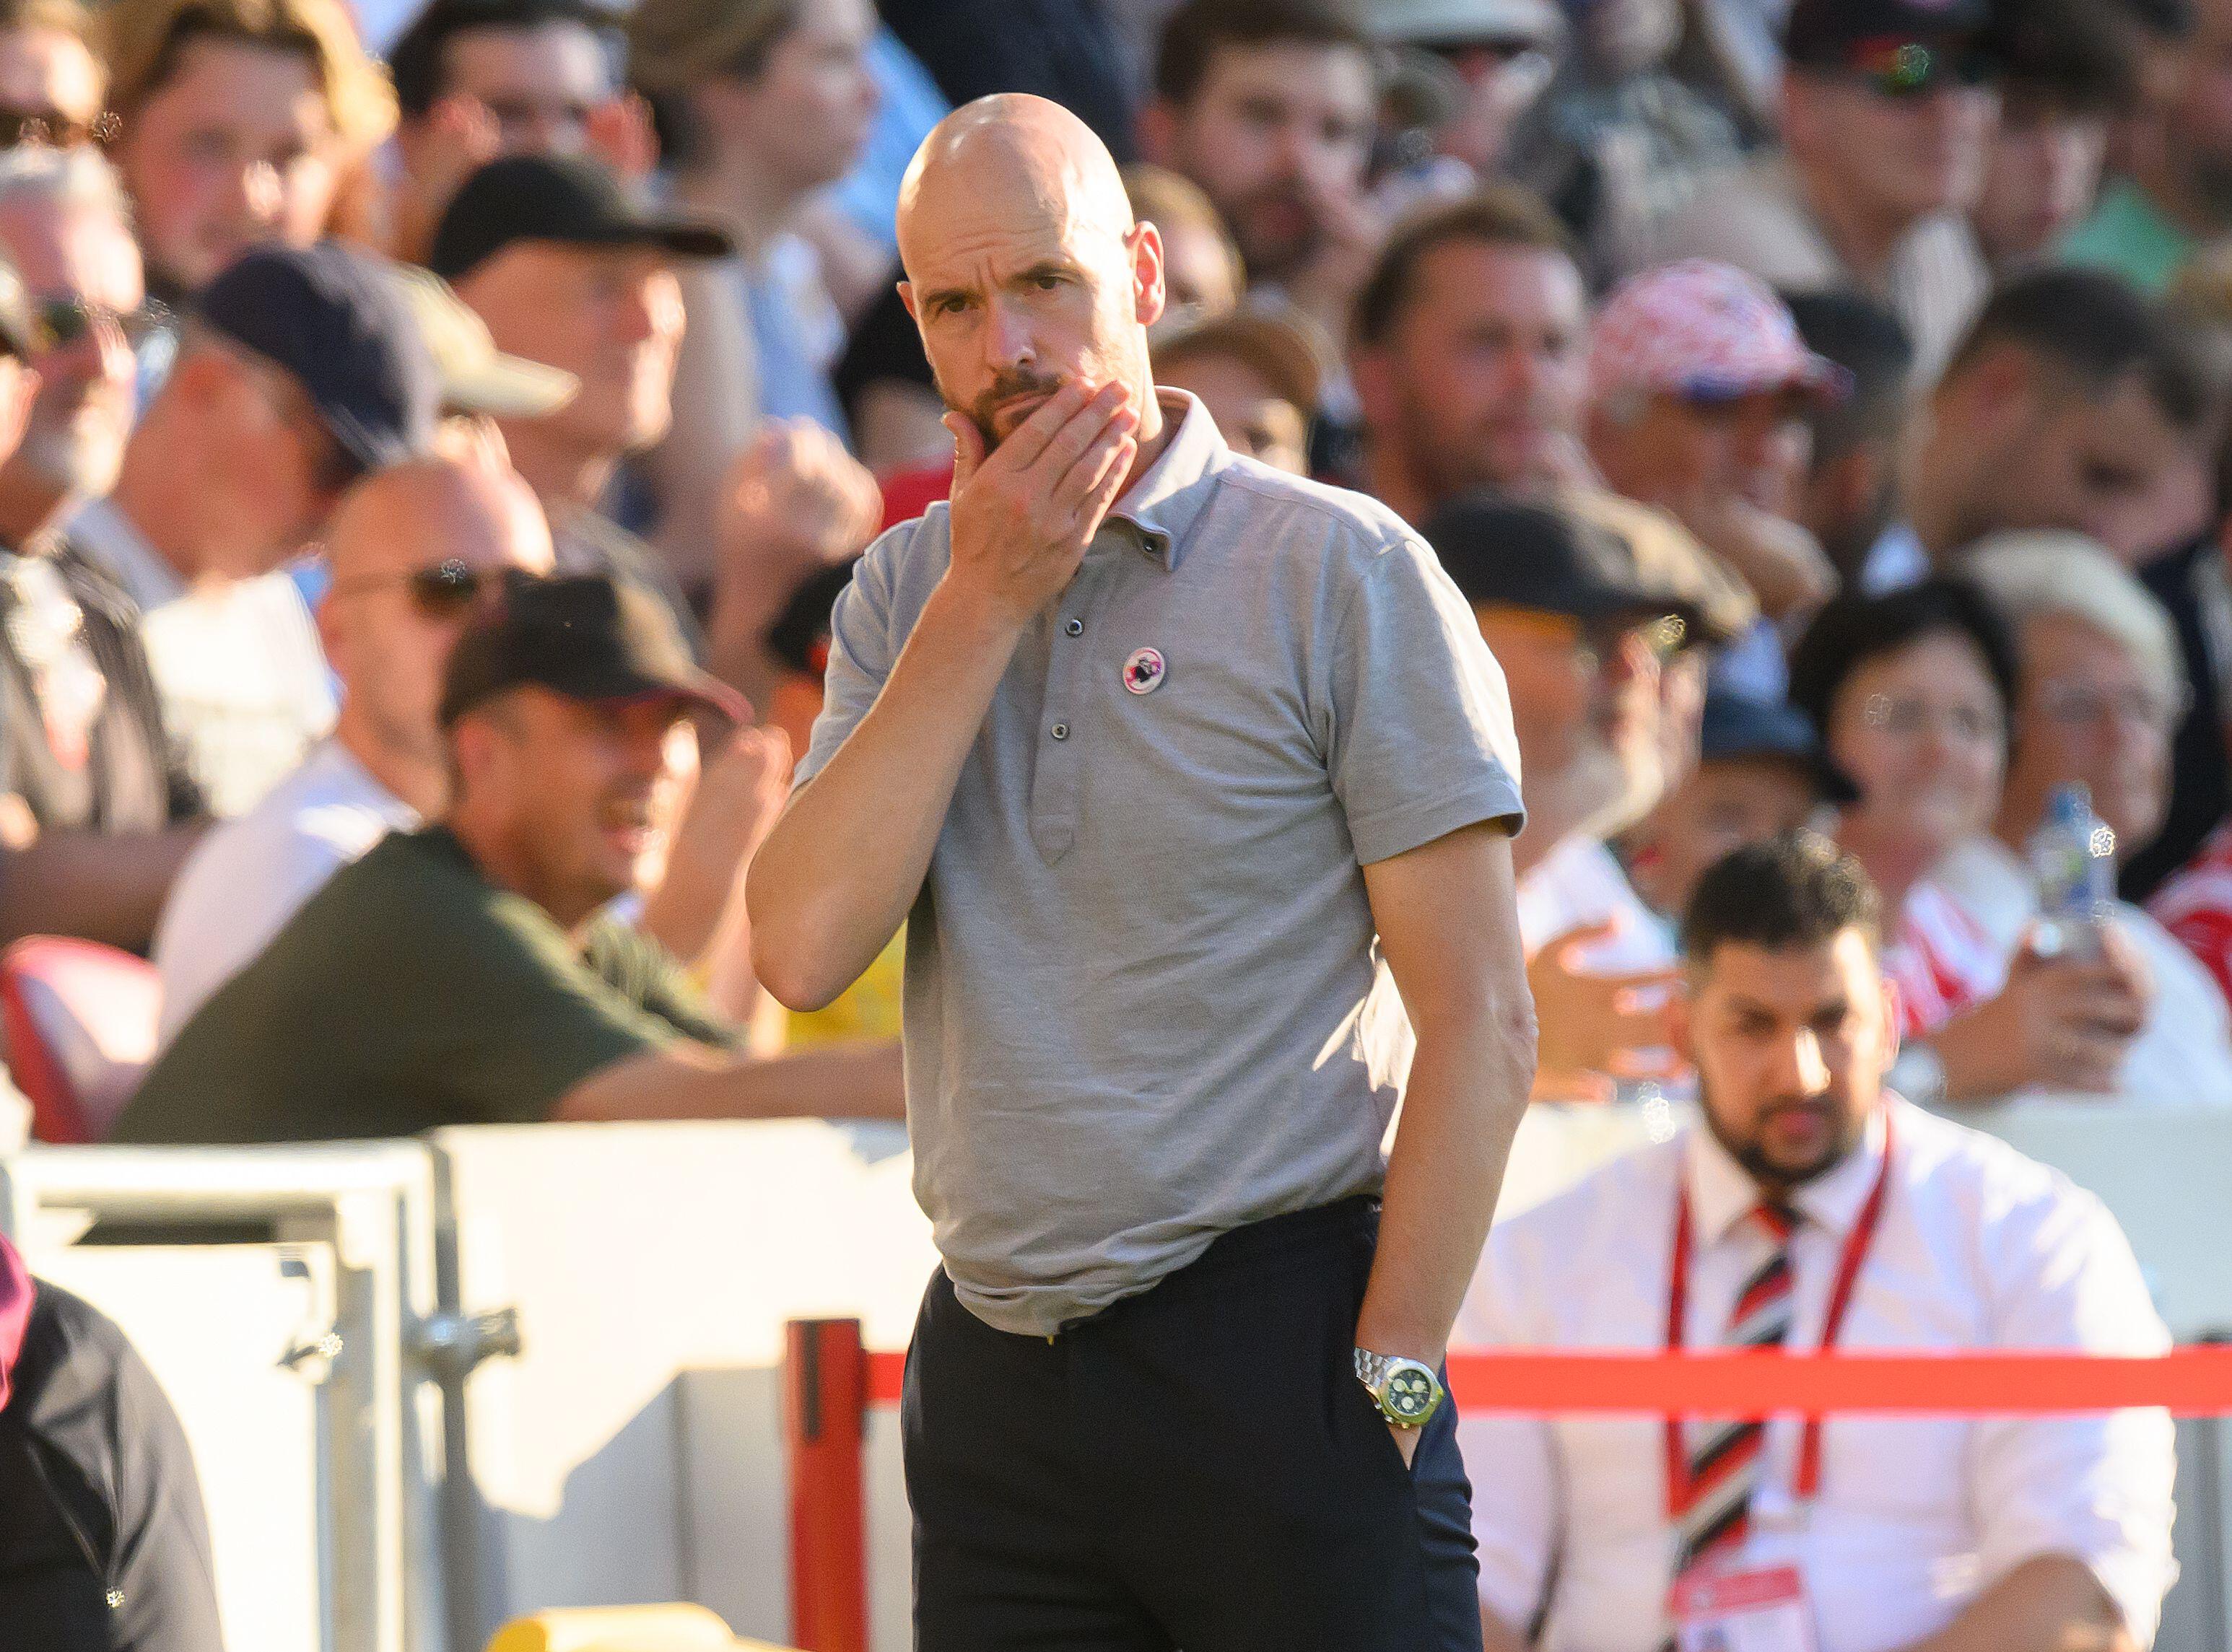 Erik Ten Hag has lost his first two Premier League games as Manchester United manager.